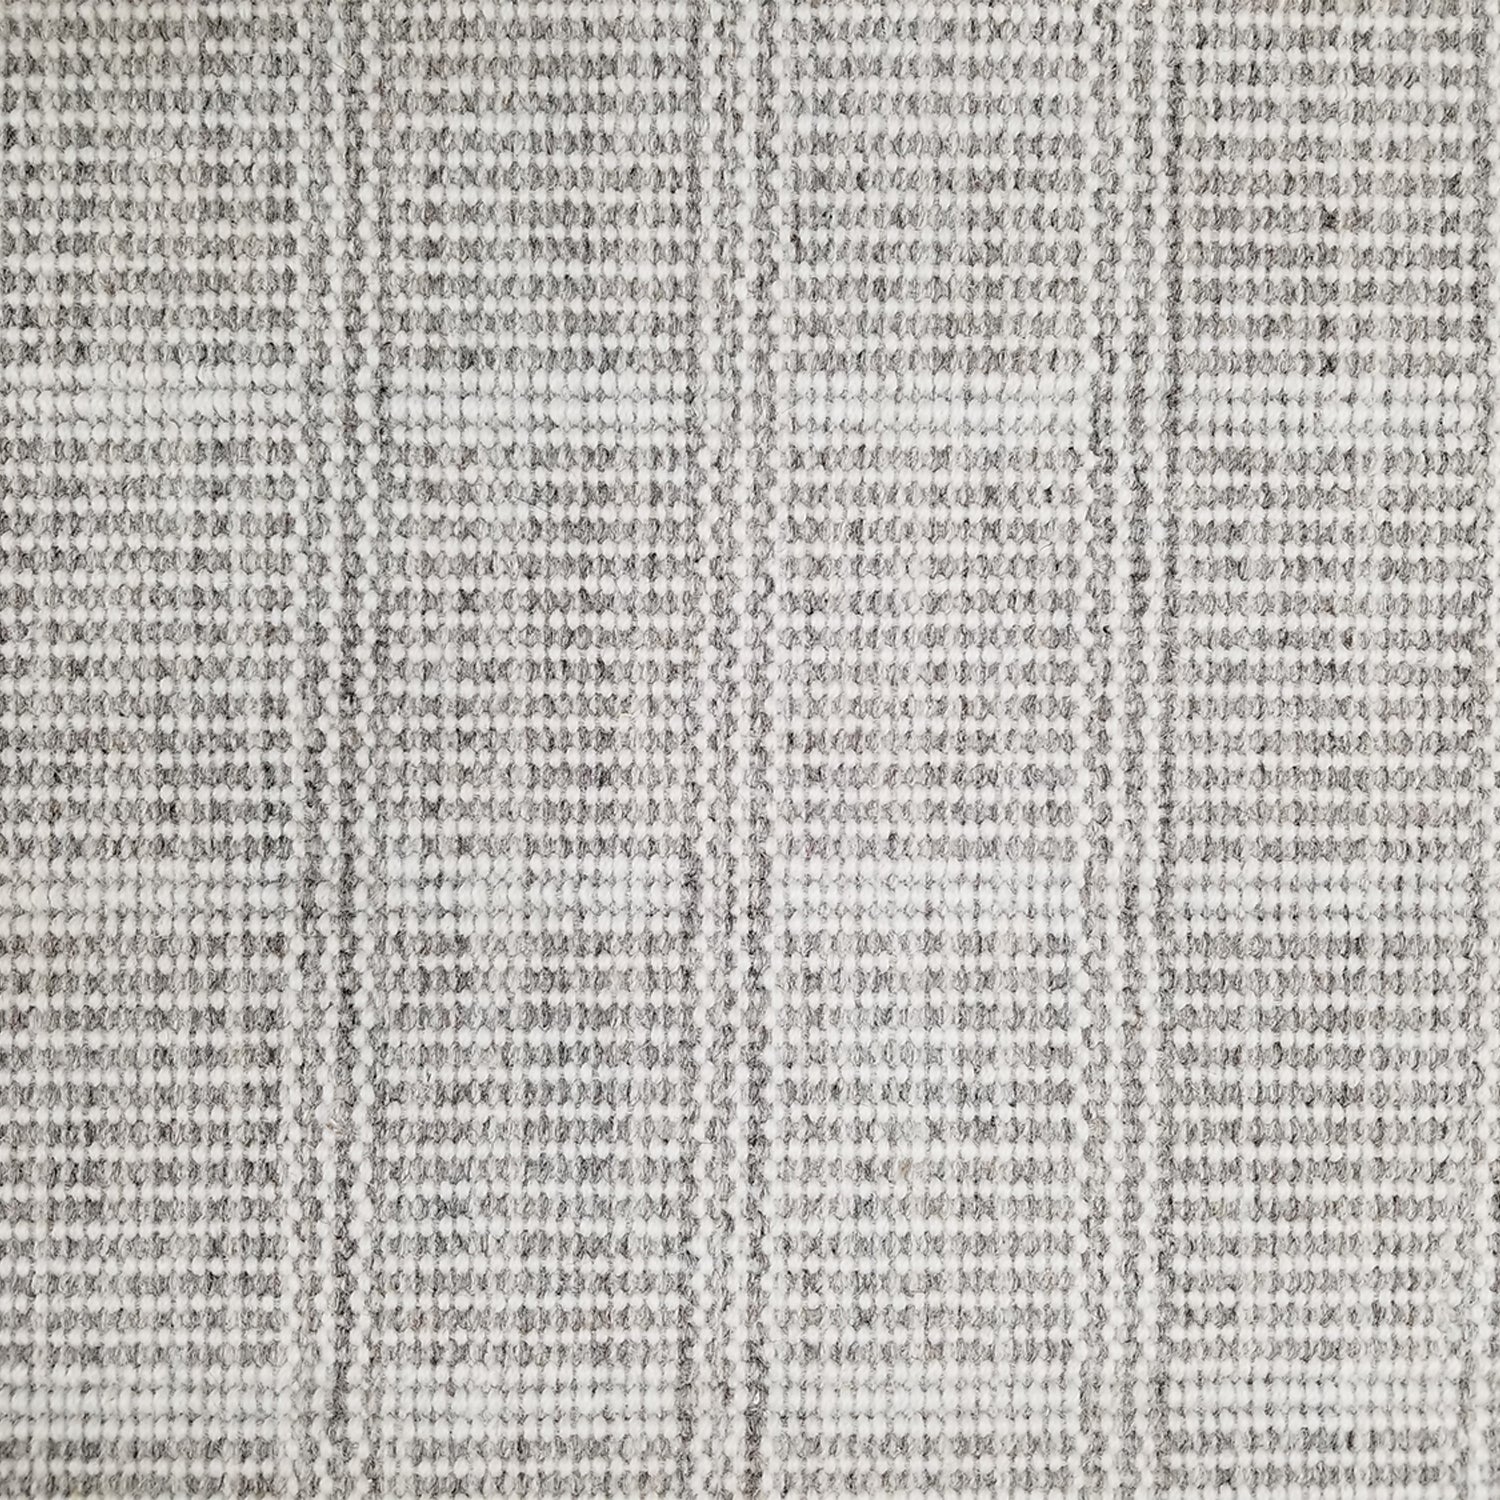 Wool broadloom carpet swatch in a plaid print in shades of gray and cream.